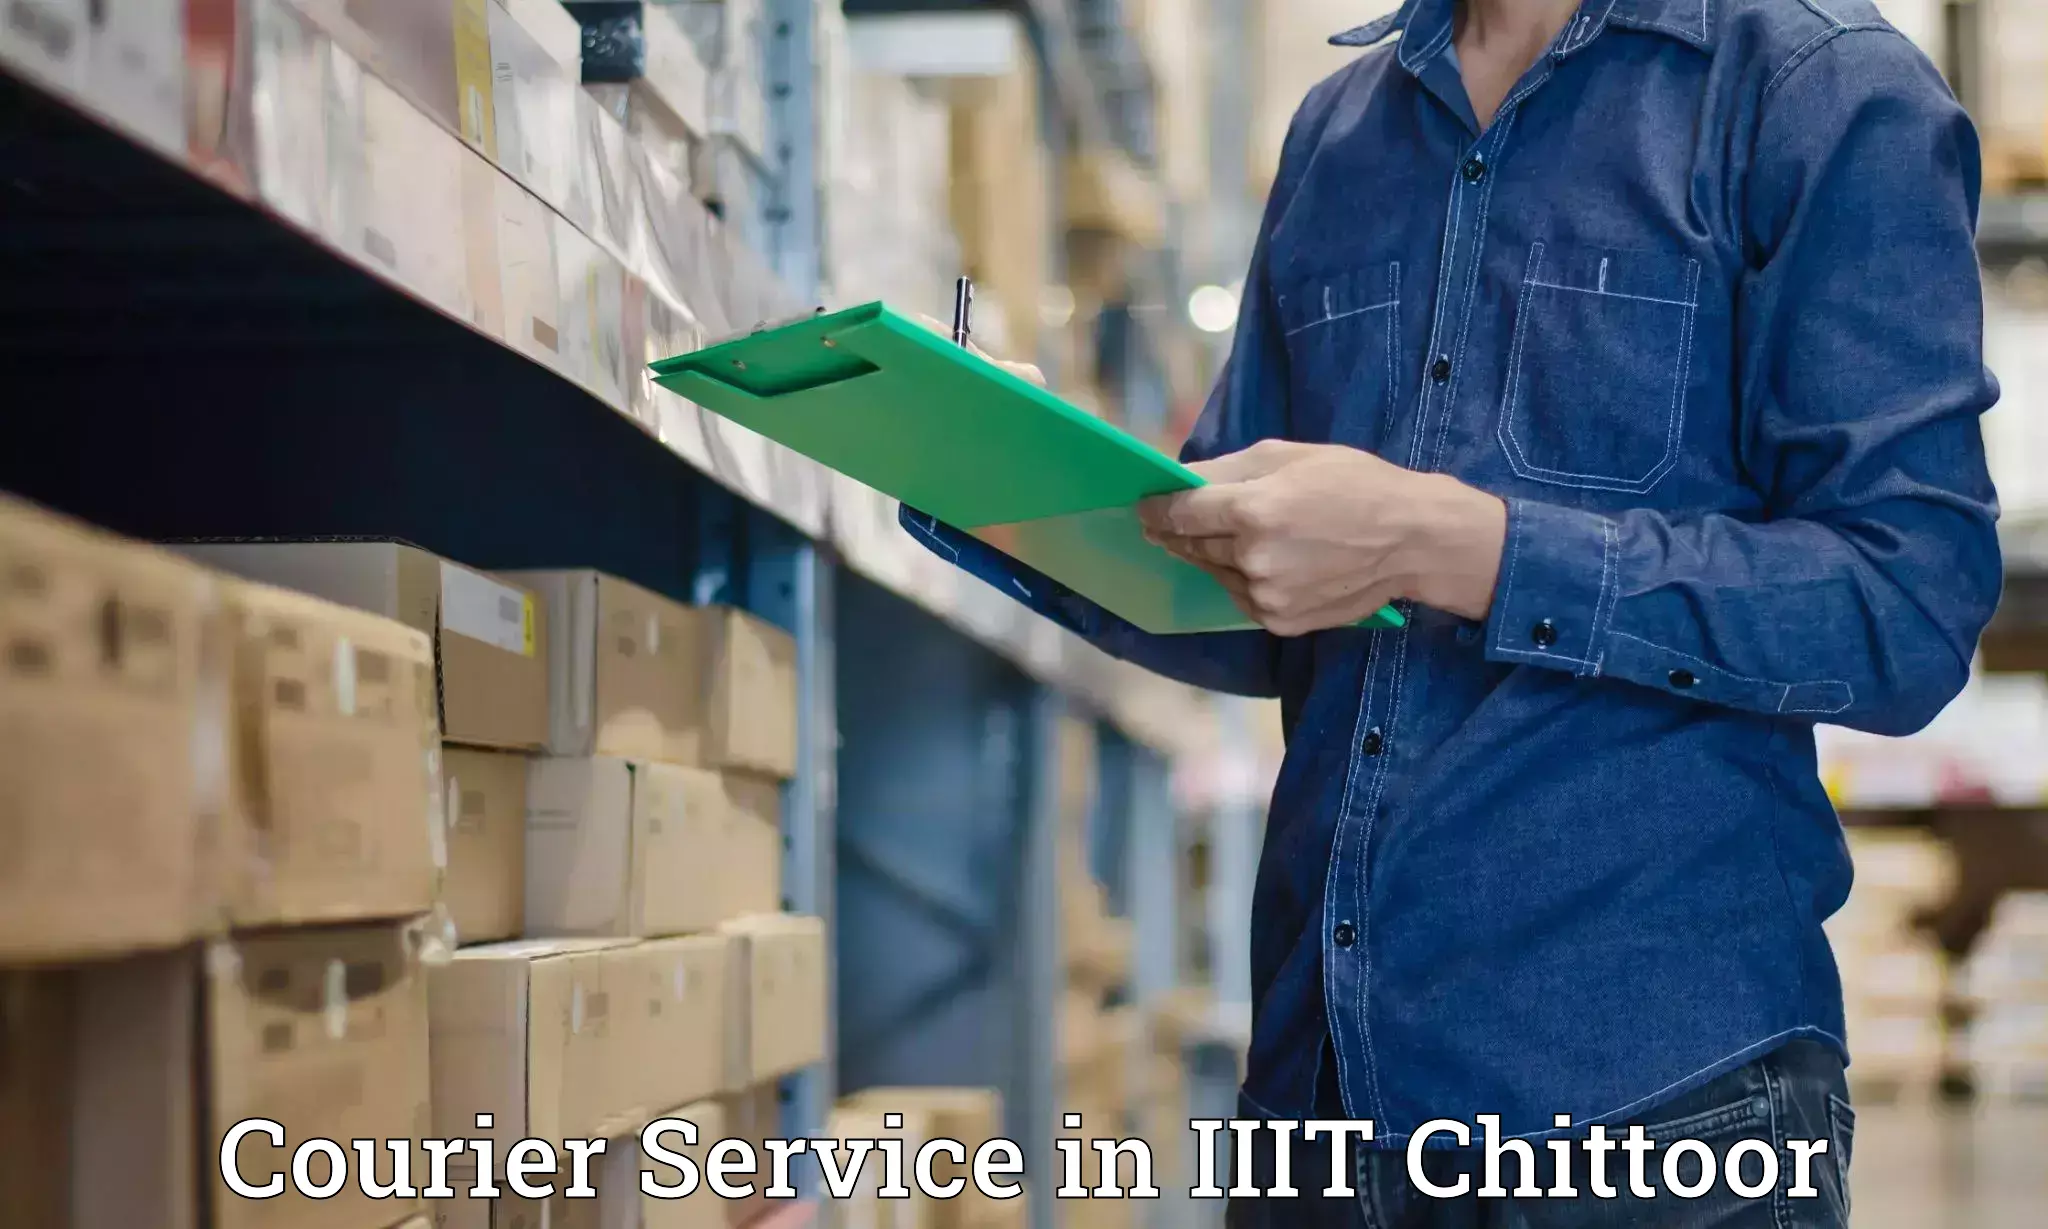 Automated parcel services in IIIT Chittoor